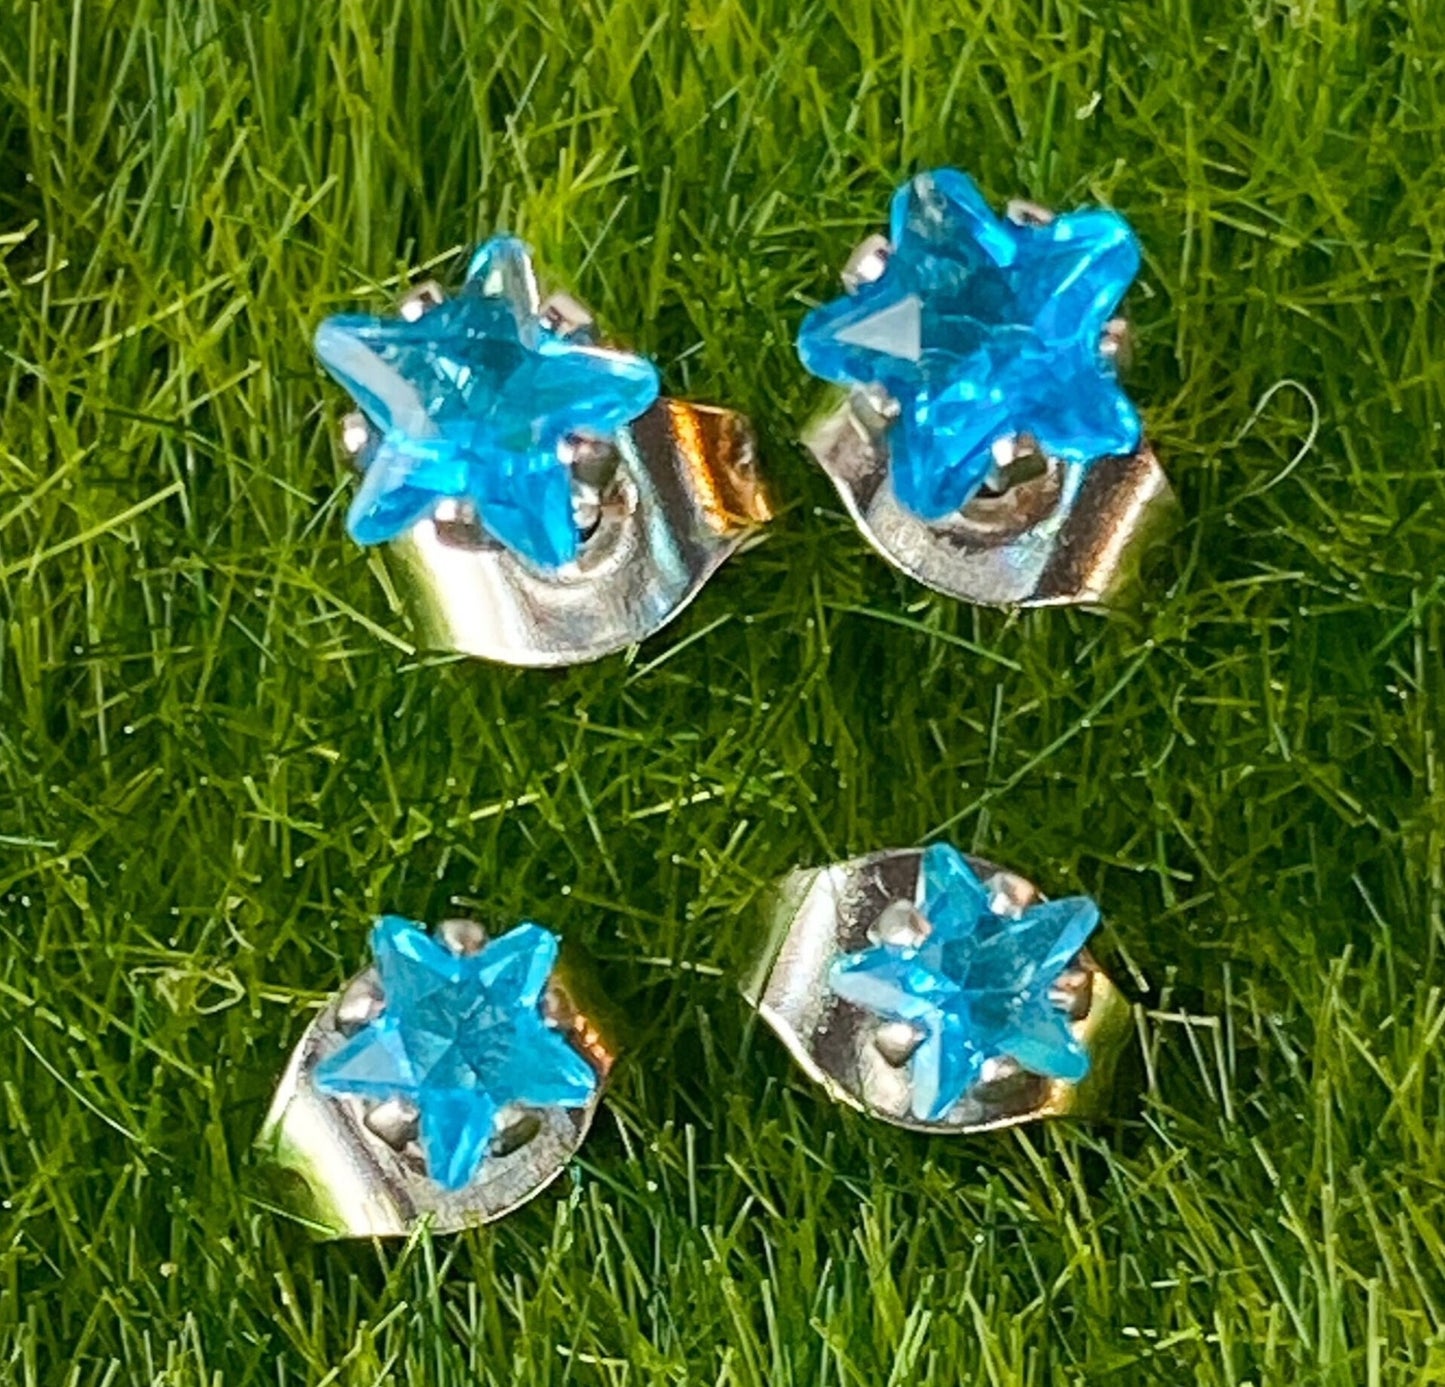 PAIR of Stunning Prong Set Star CZ Gem 316L Surgical Steel Stud Earrings - 4mm or 5mm - Clear, Gold, Aurora Borealis & Aqua Available!